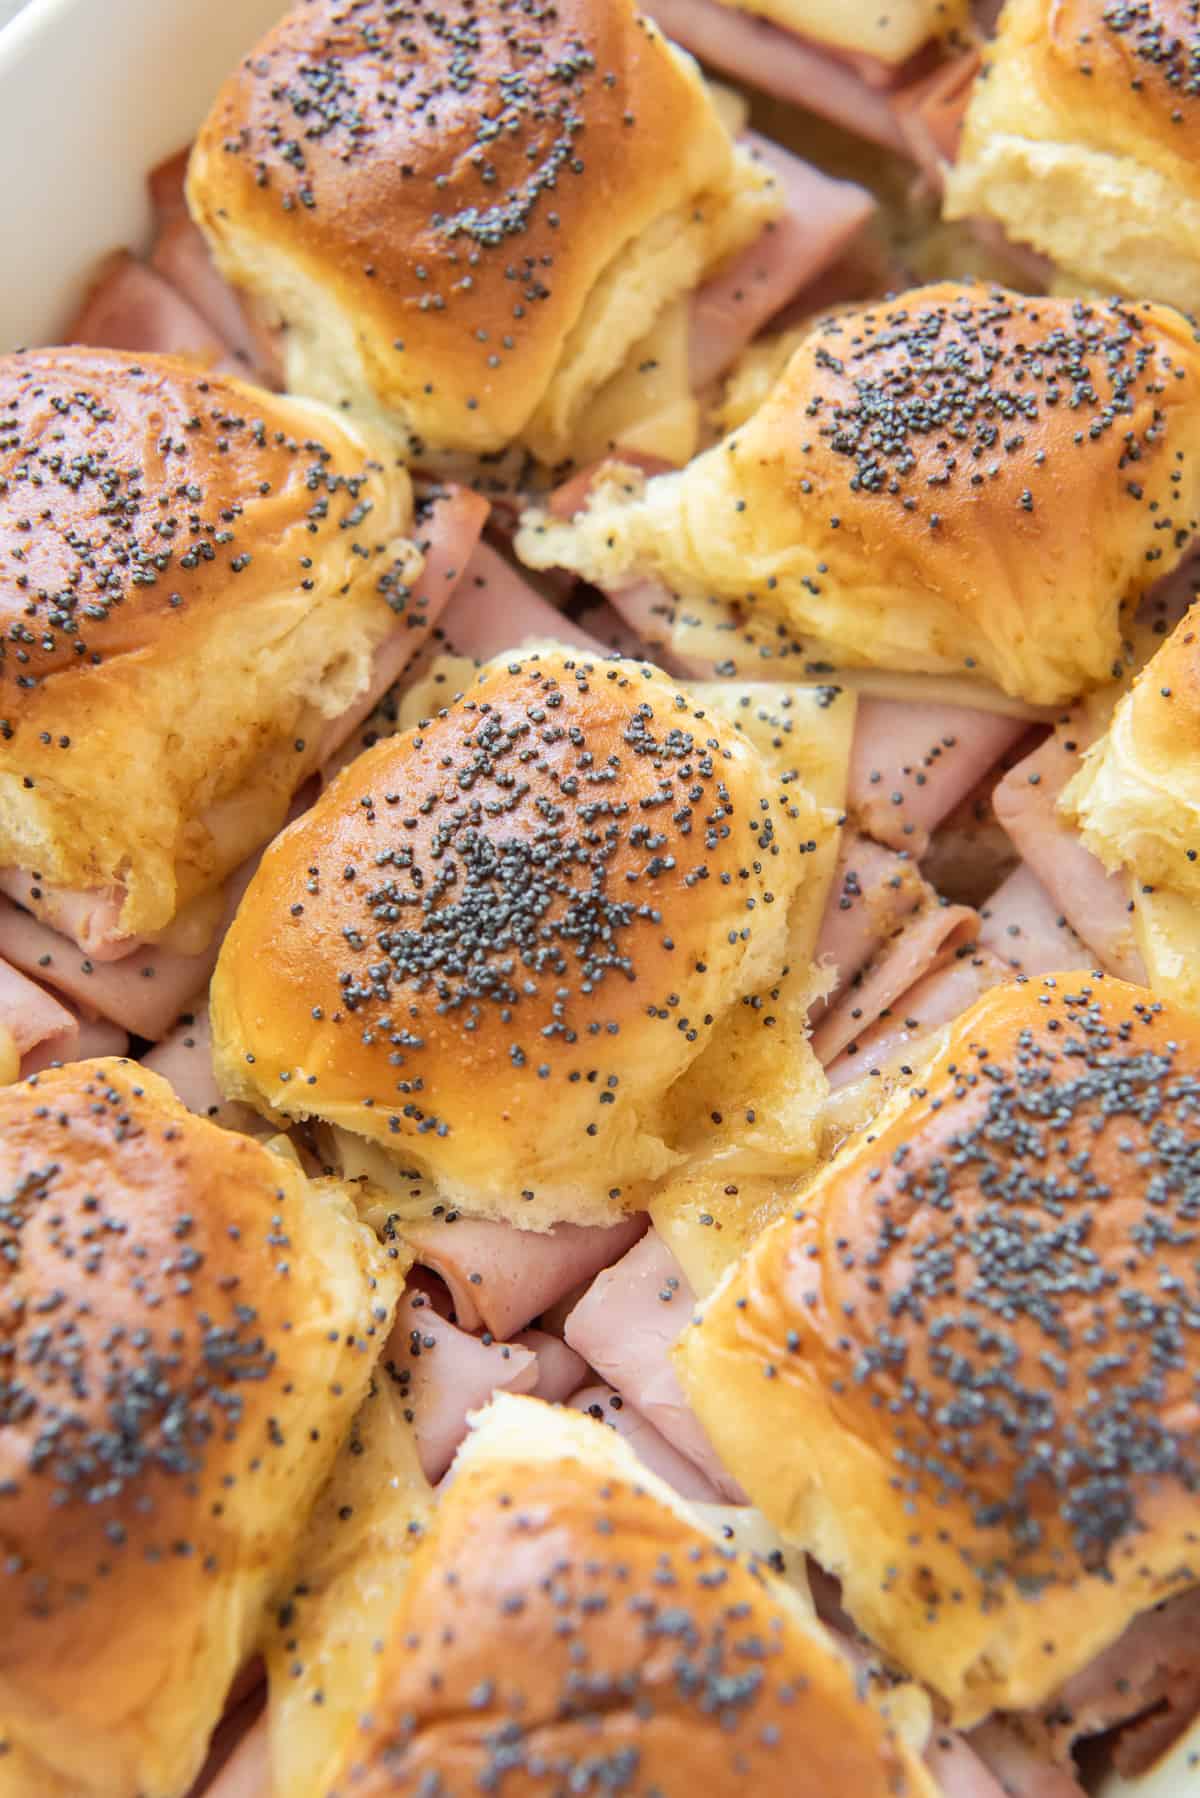 A close up of sliders topped with poppy seeds.